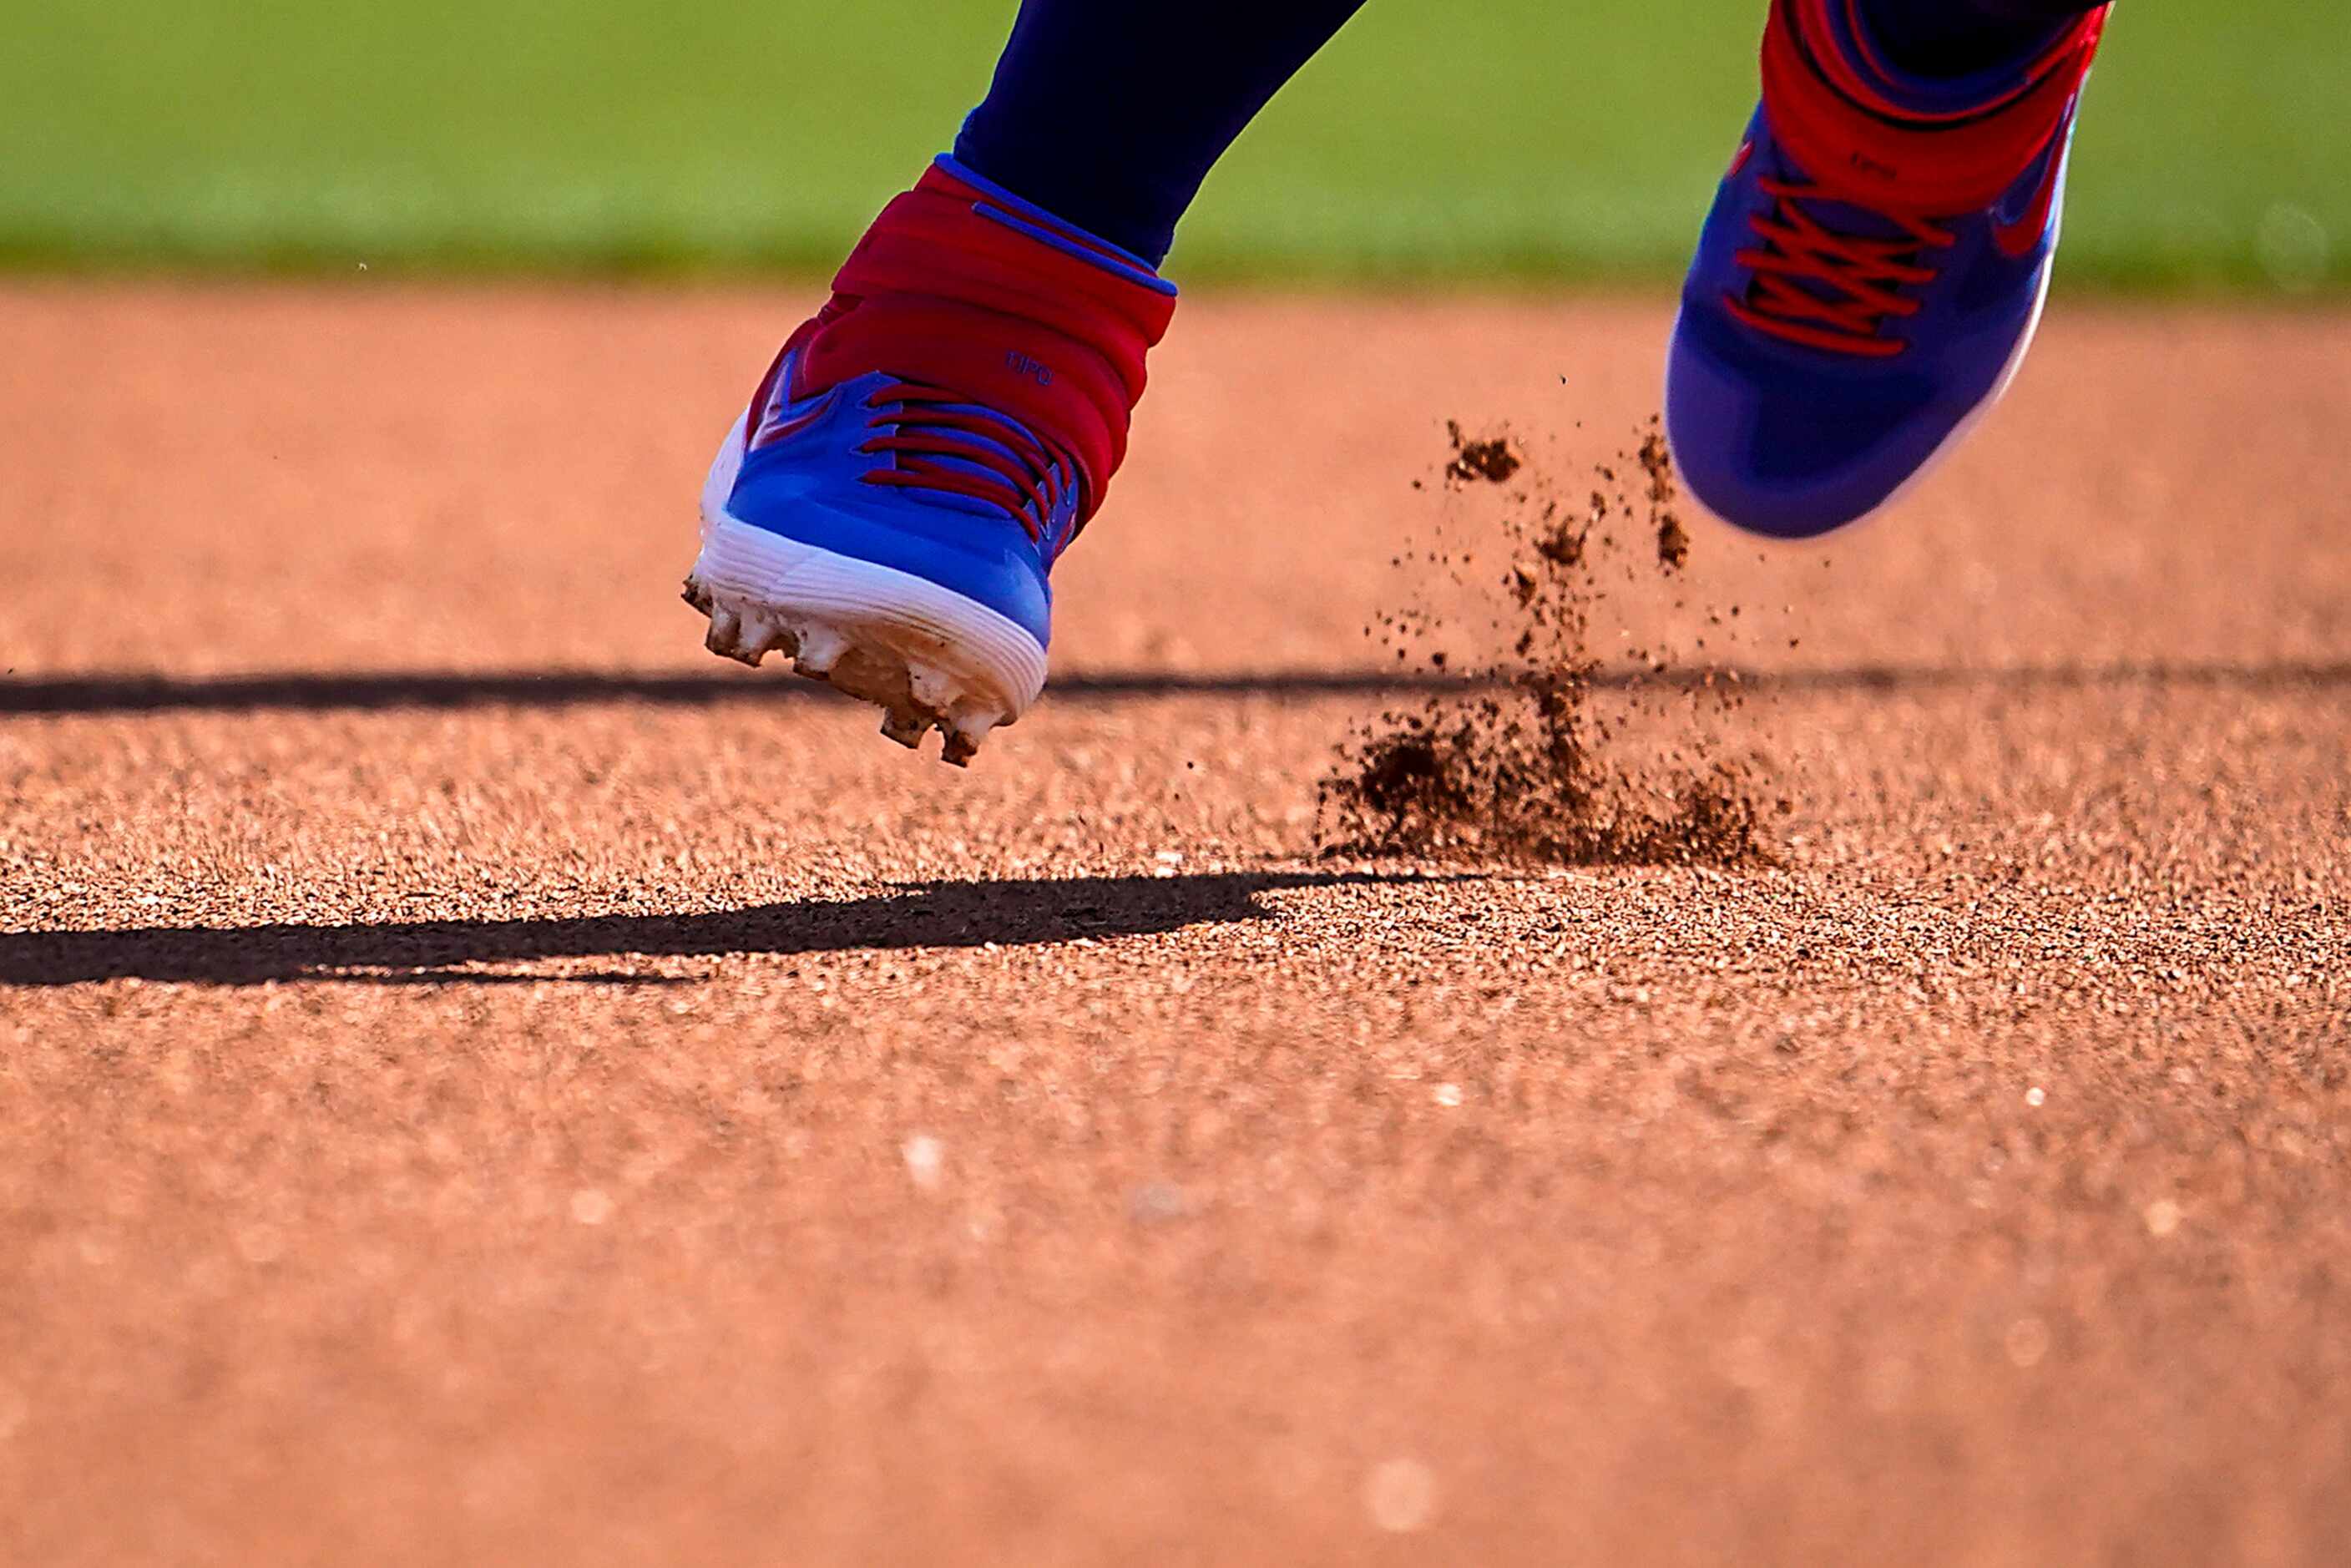 Dirt flies from his cleats as Texas Rangers second baseman Rougned Odor participates in a...